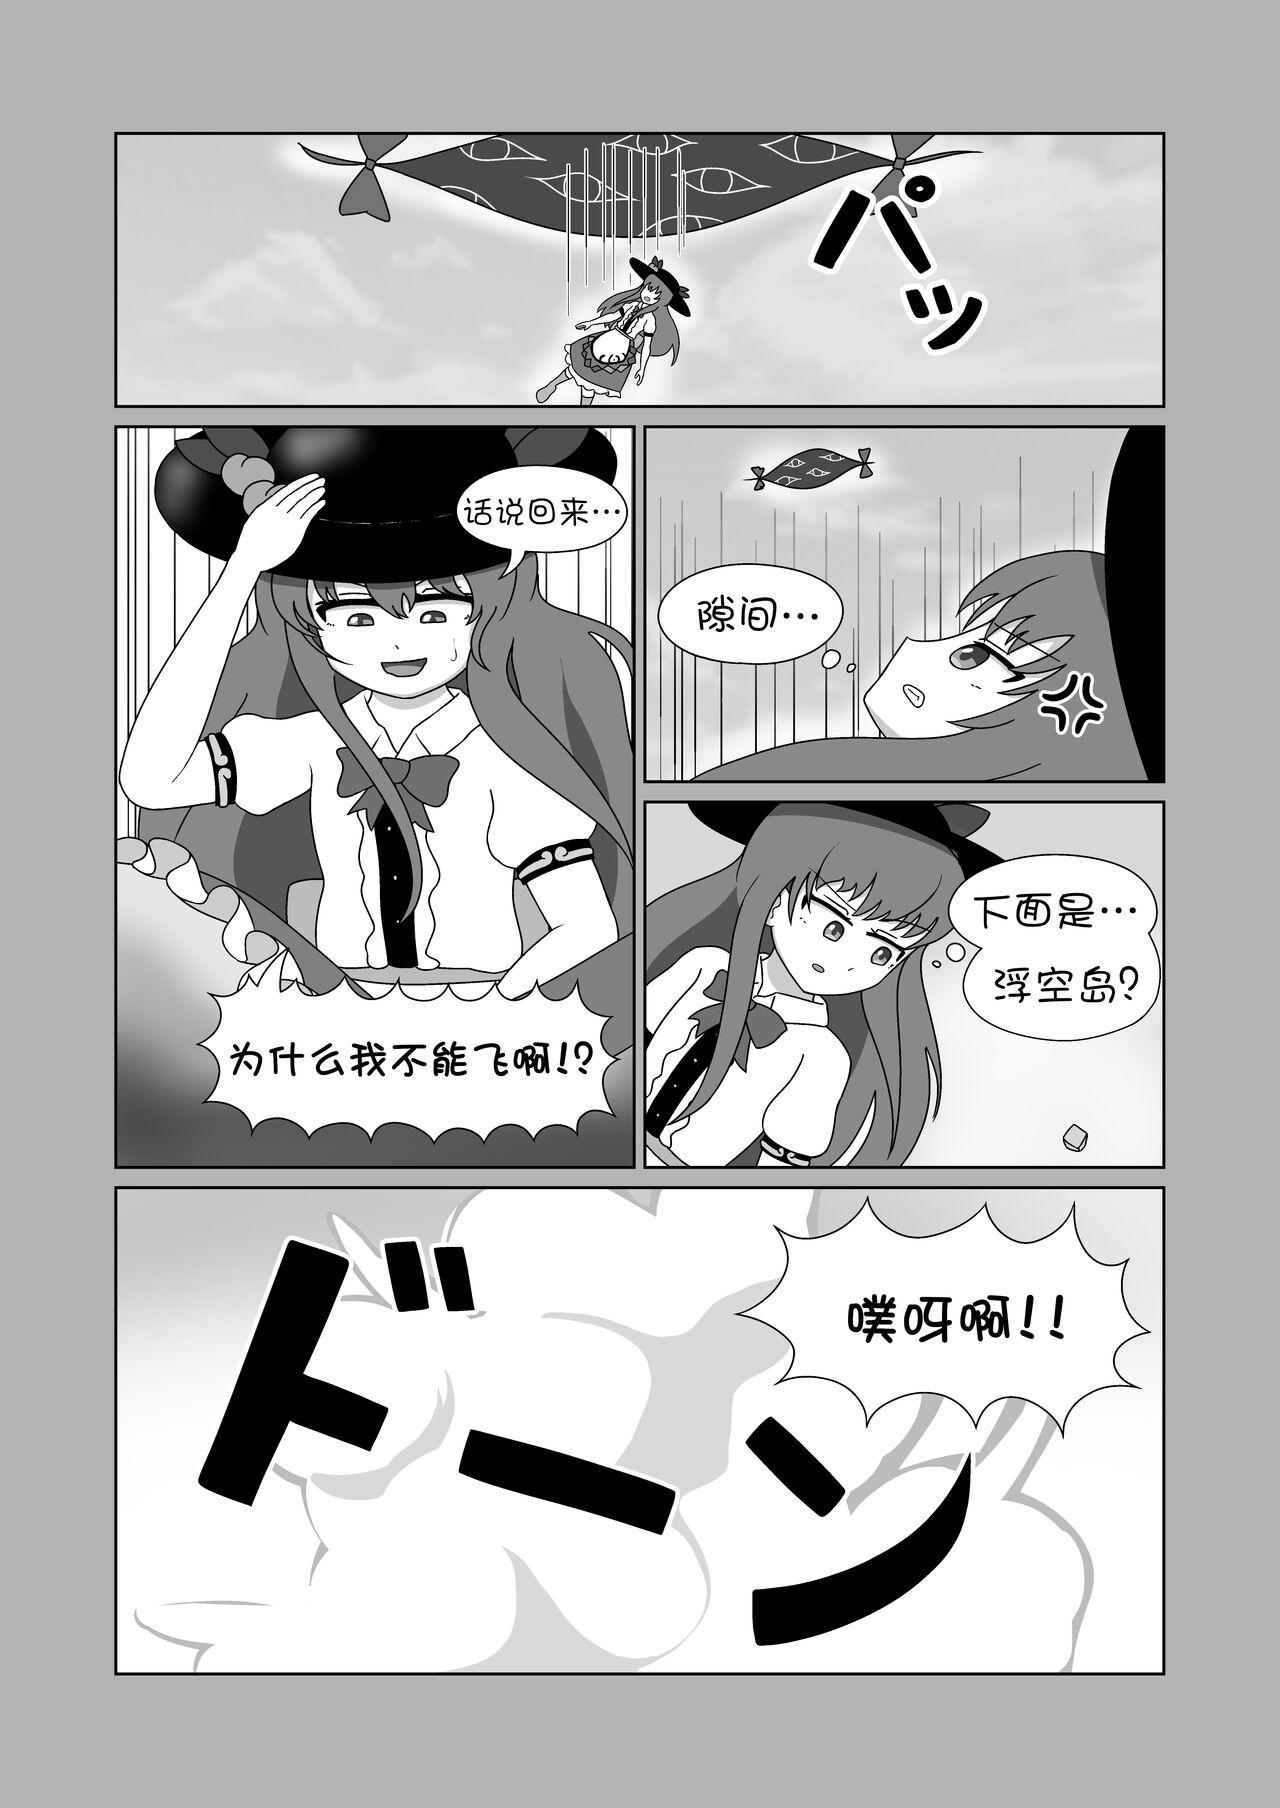 Bare 天子 in BecomeFumo - Touhou project Massage Sex - Page 4